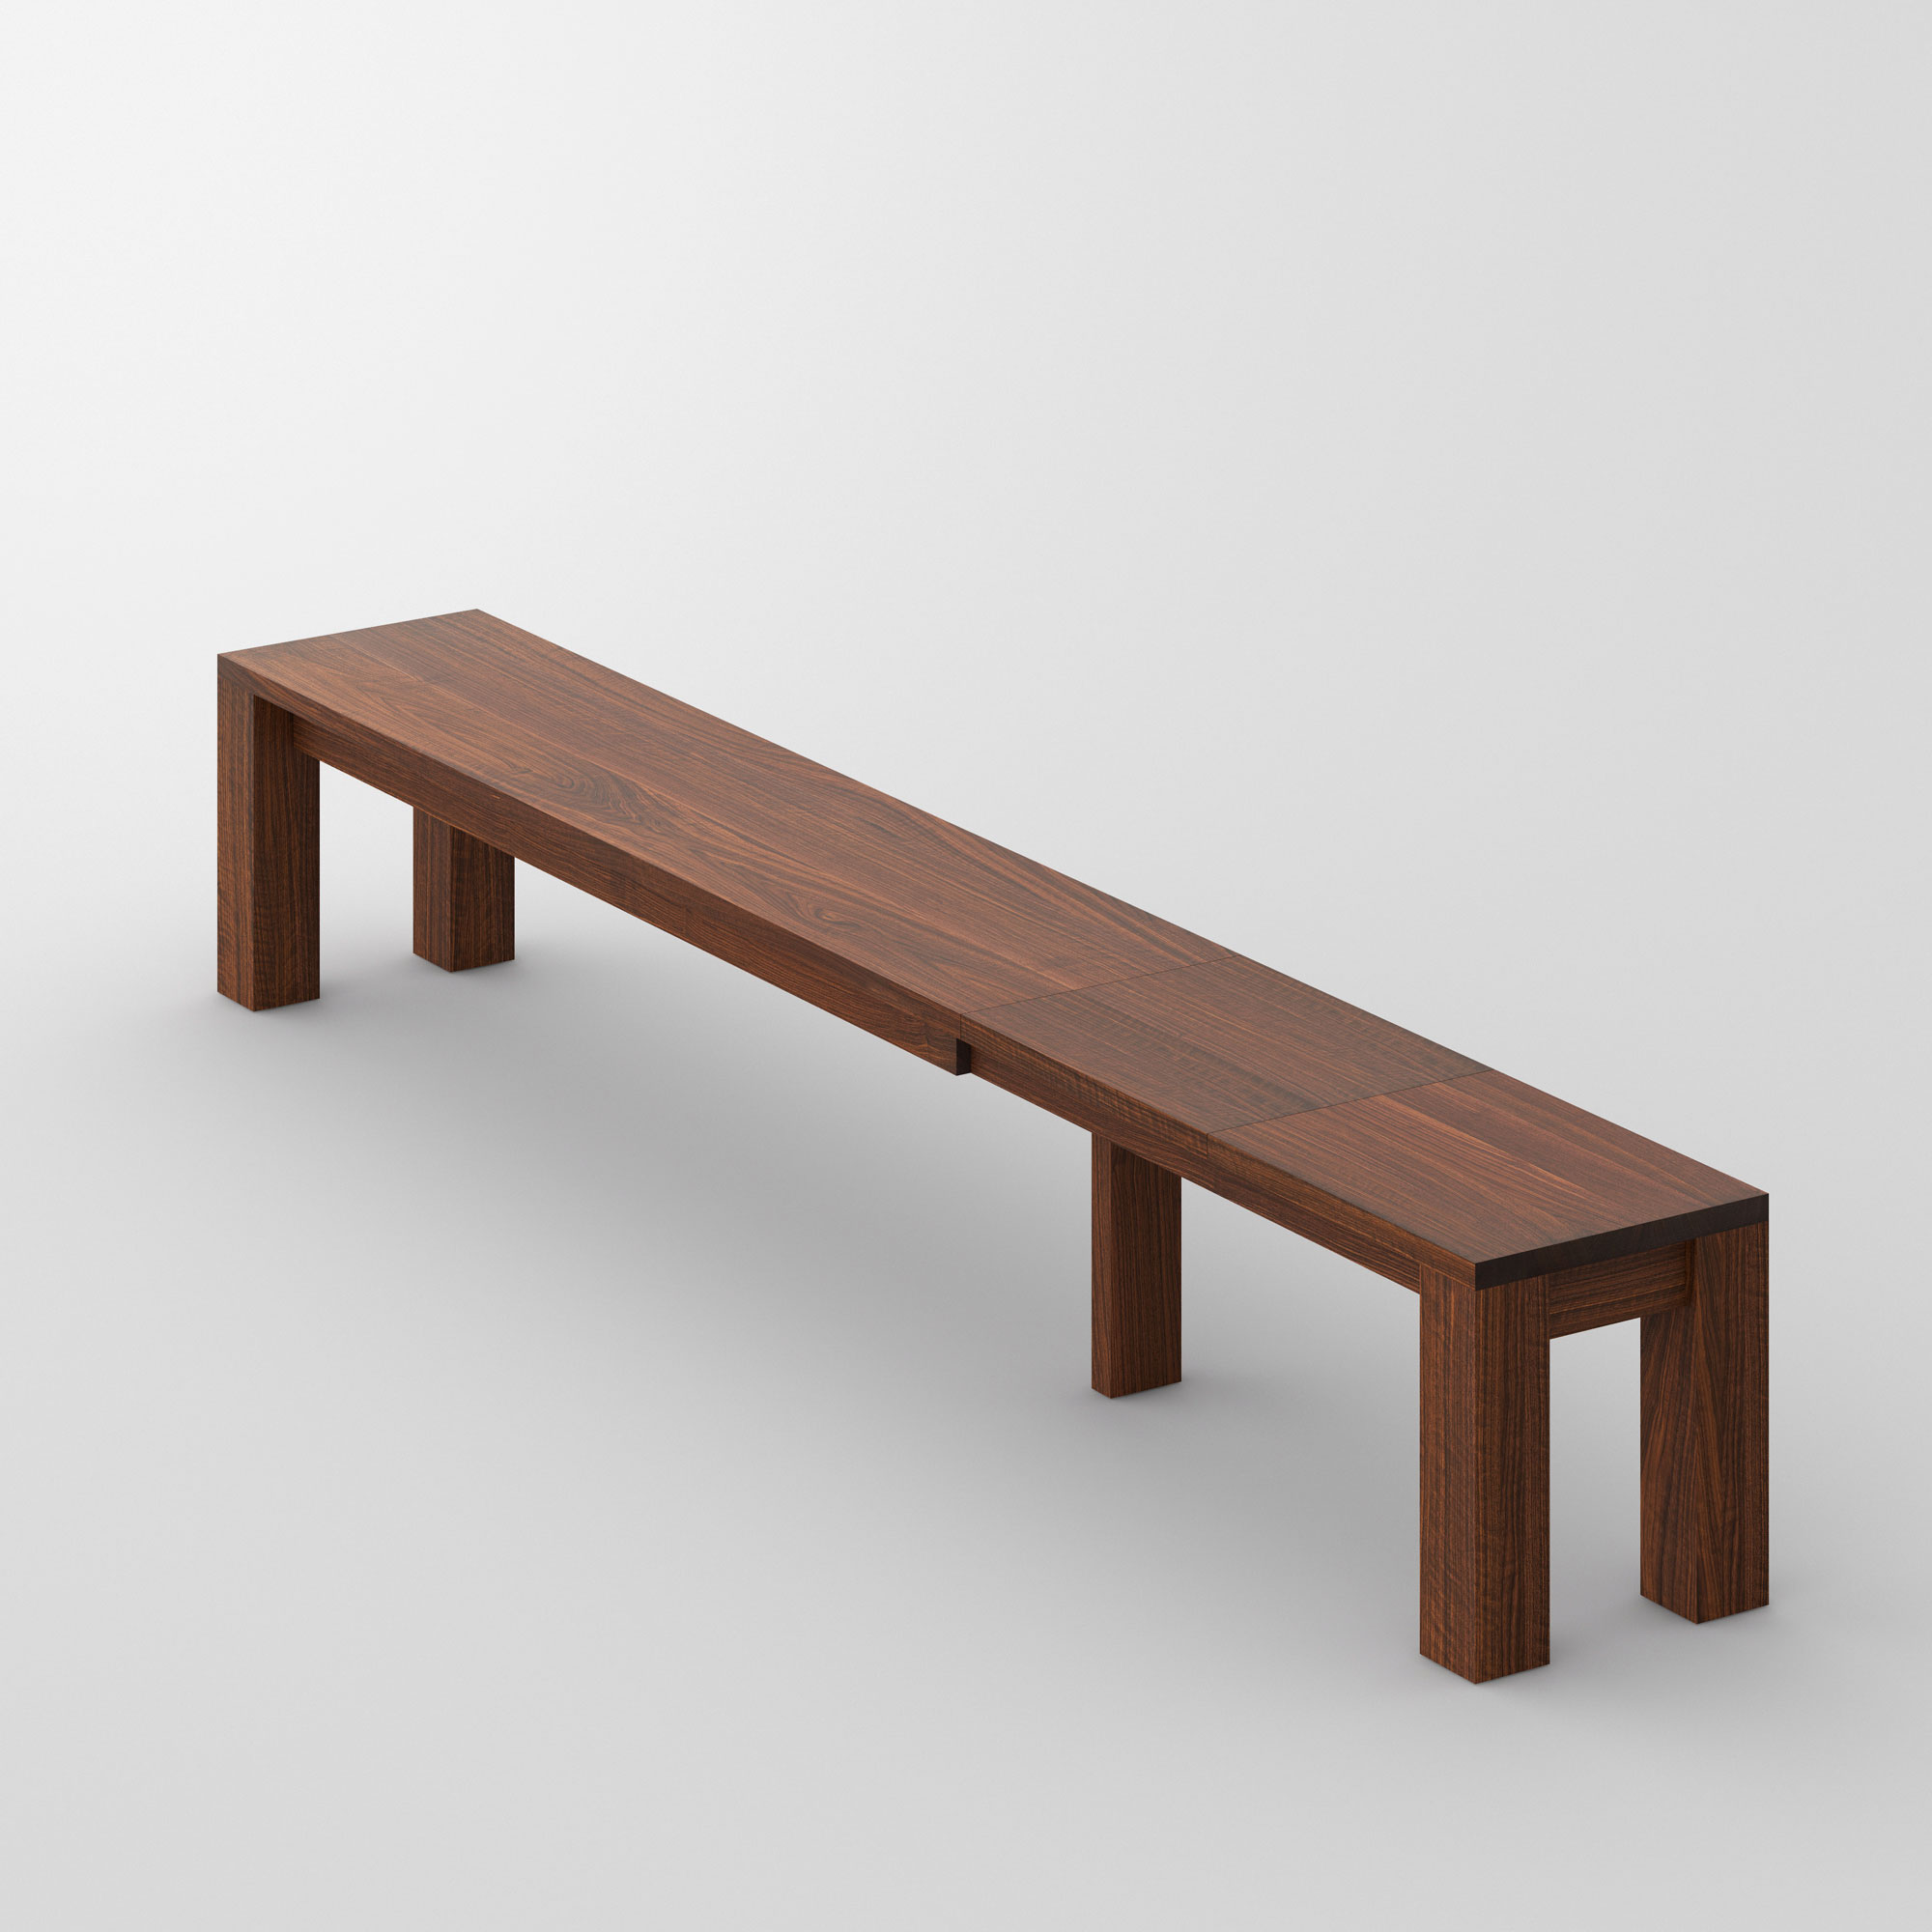 Extendable Bench CUBUS EP 3 cam3 custom made in solid wood by vitamin design